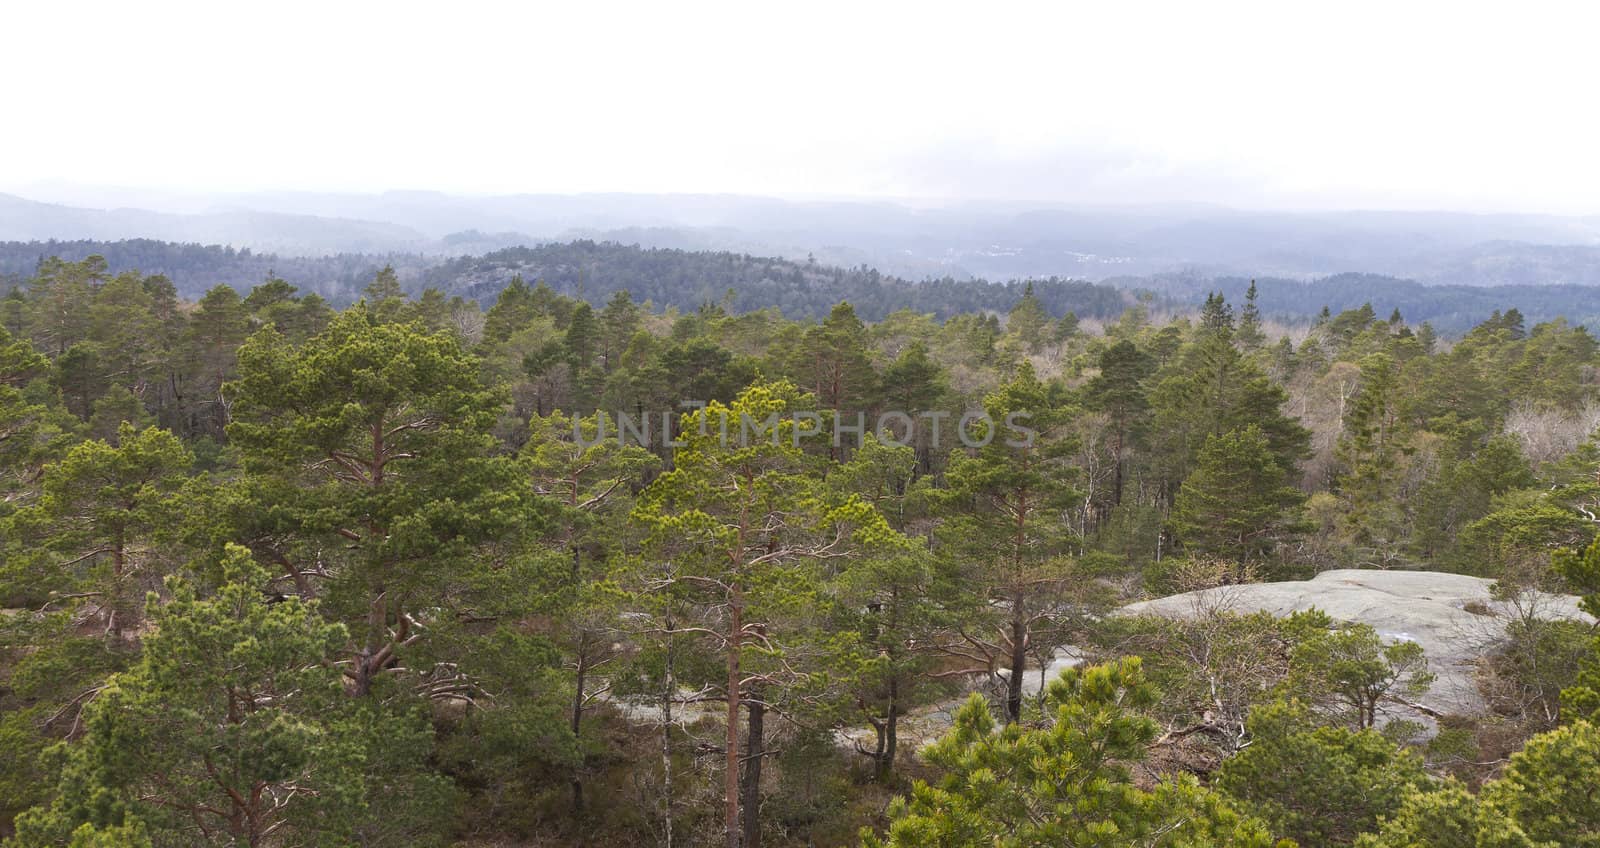 forested landscape in south norway with rock on right side